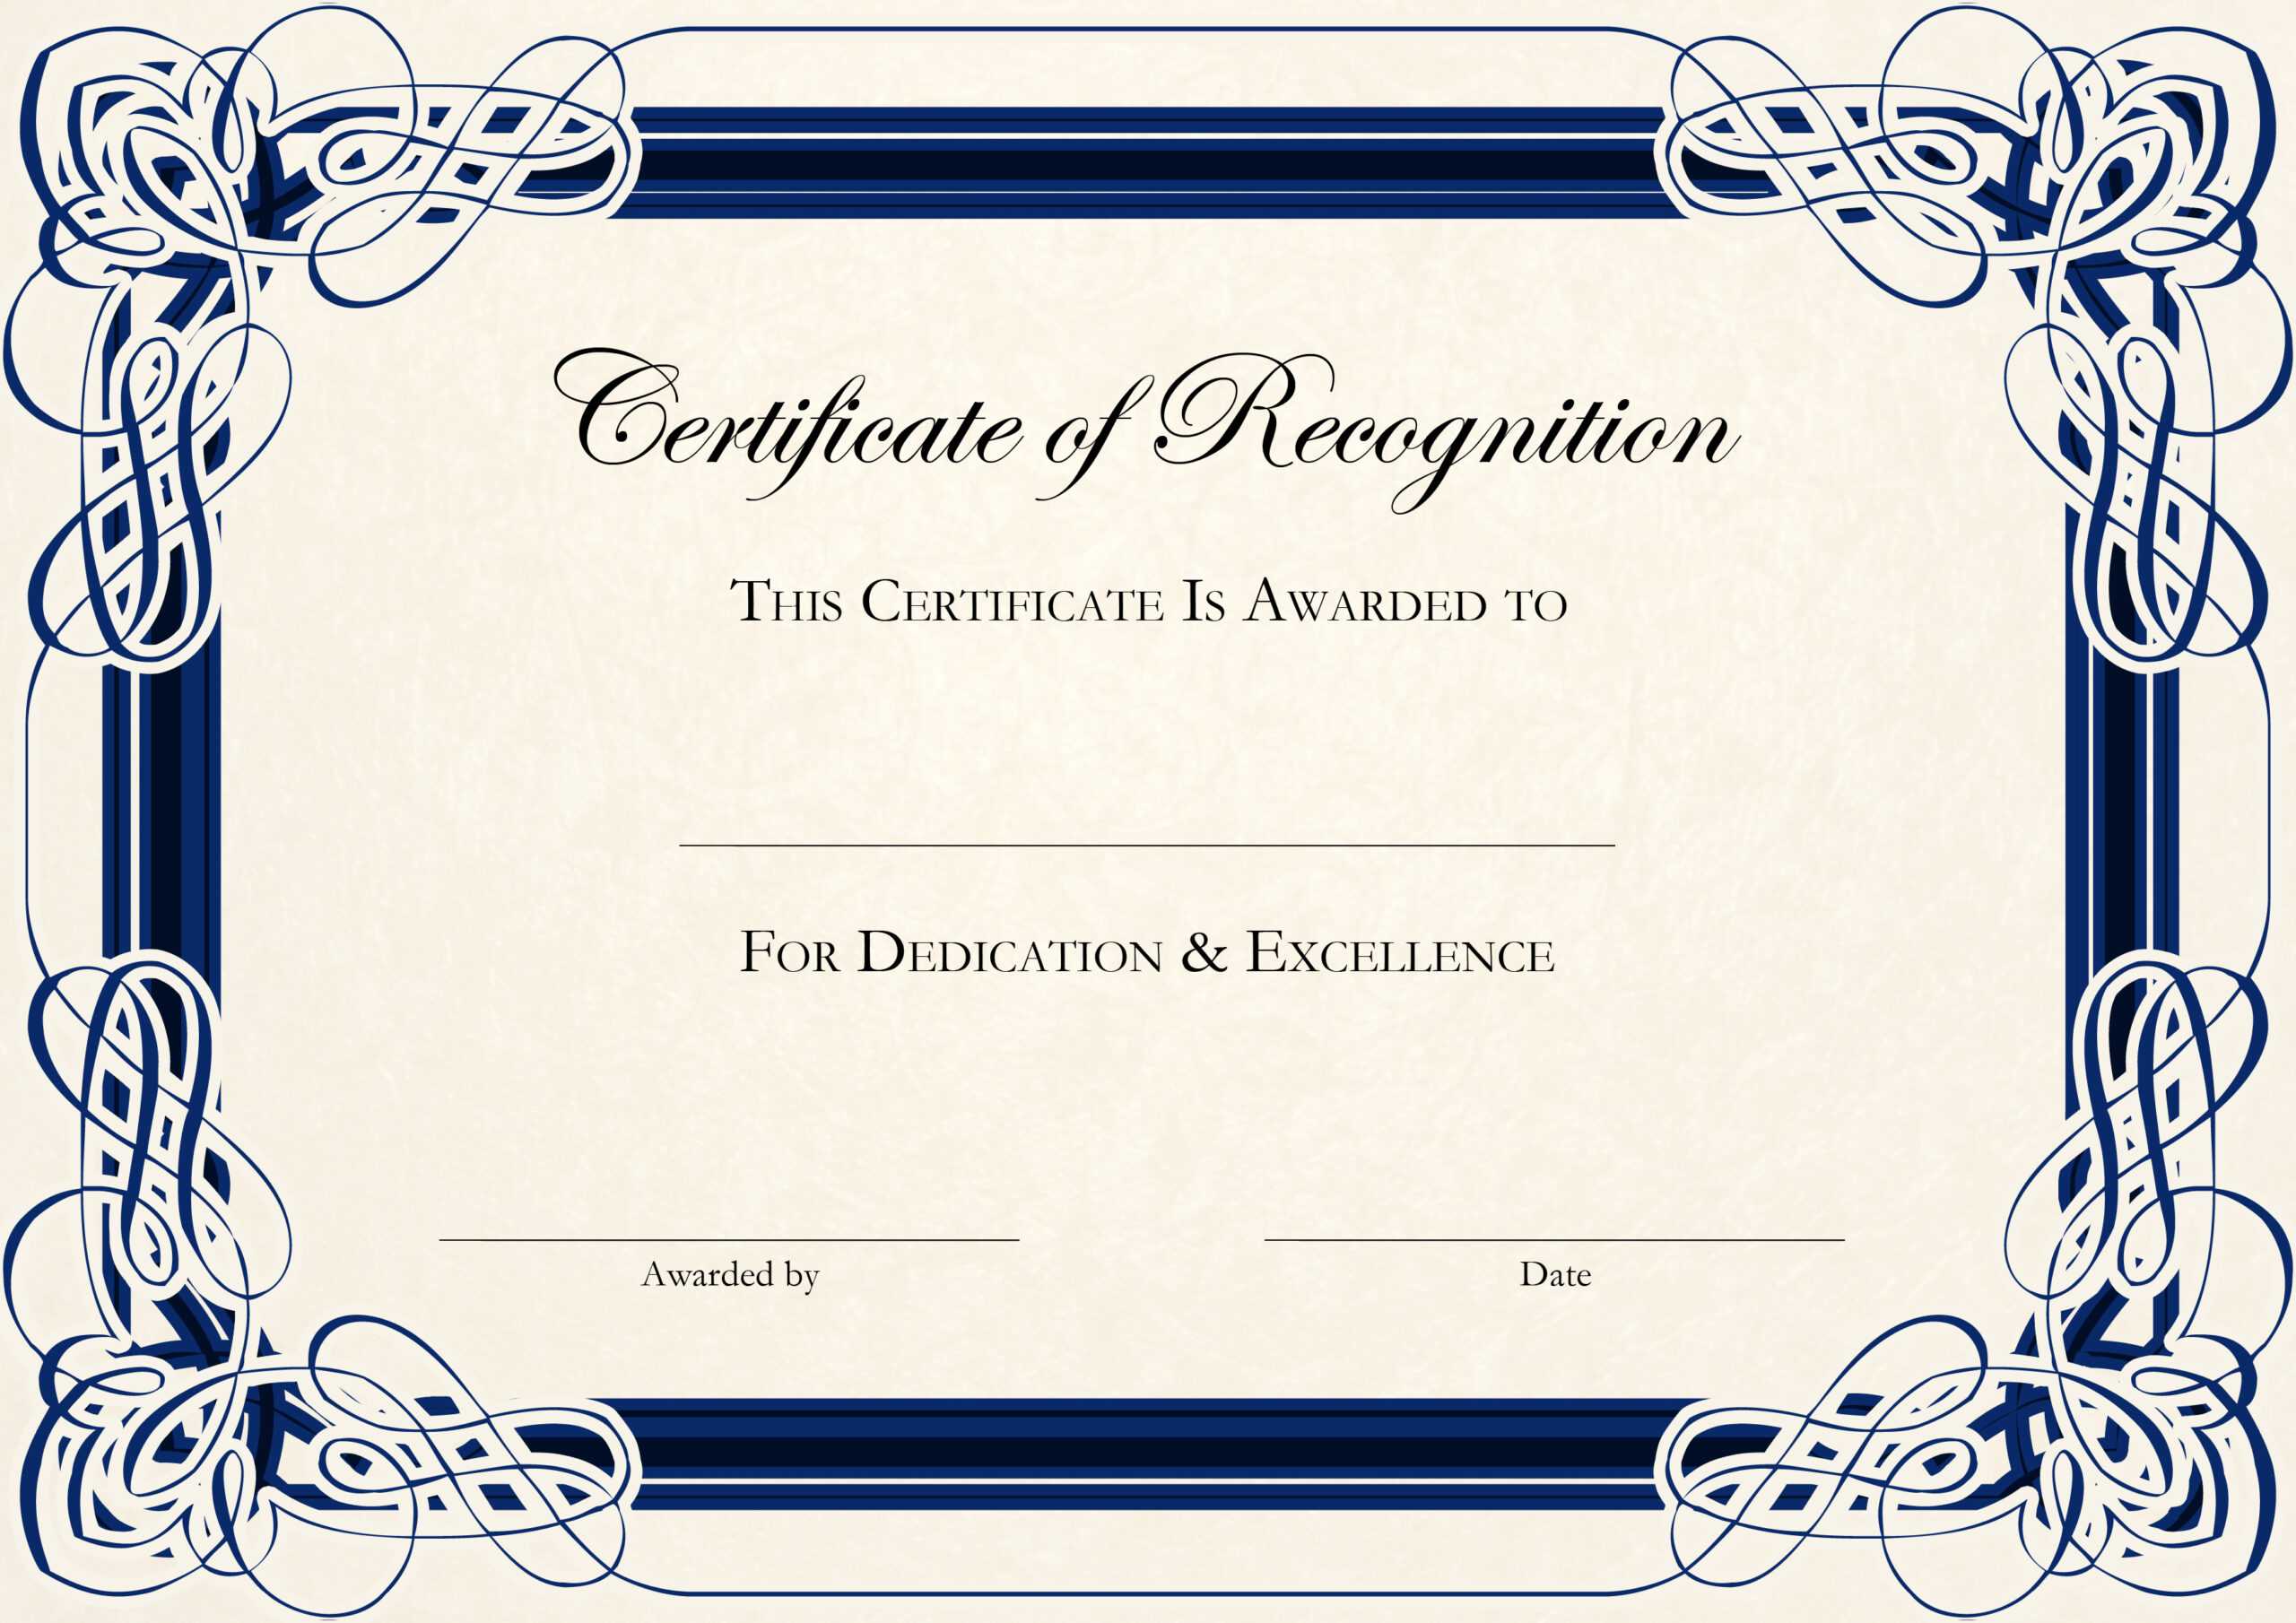 Baby Doll Birth Certificate Template ] – Amazon Com My Regarding Baby Doll Birth Certificate Template